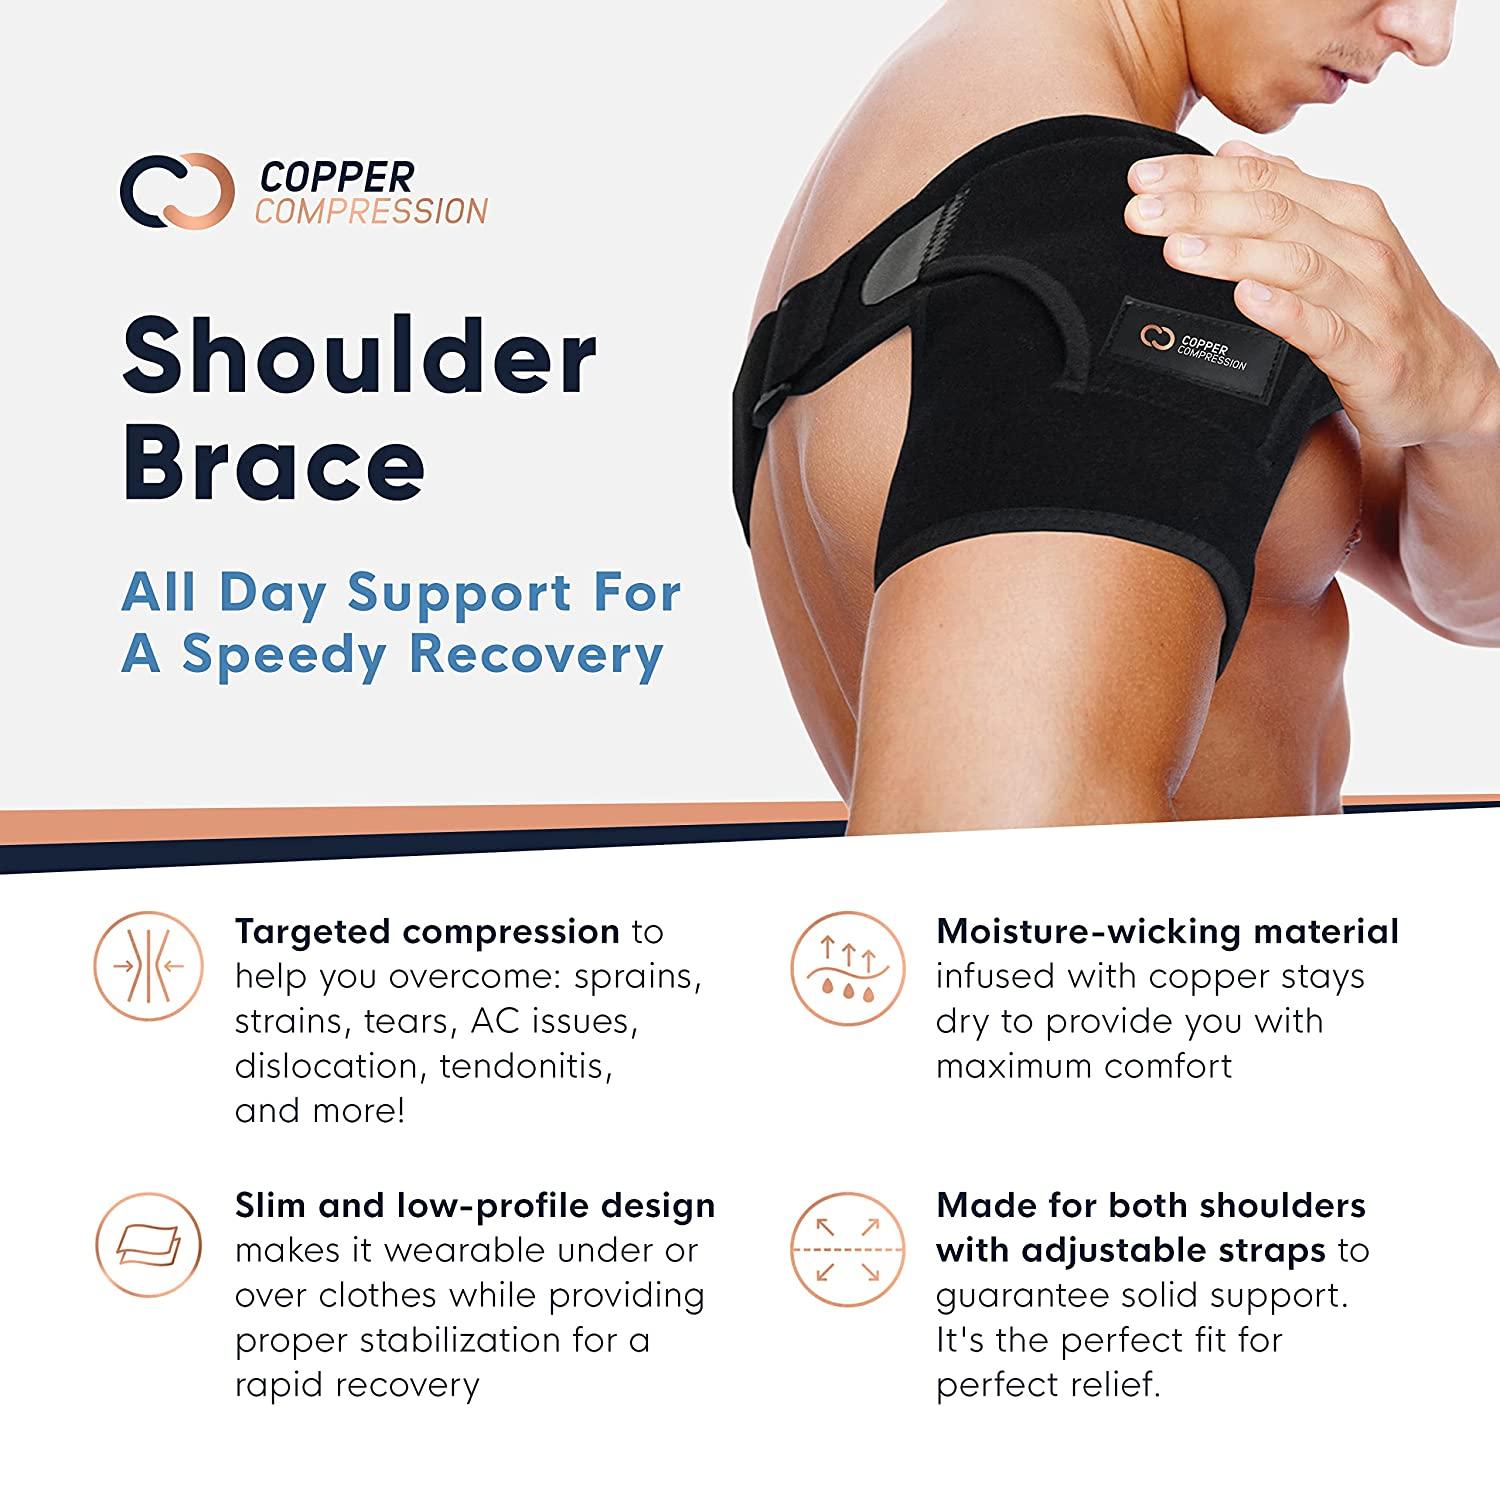 Copper Compression Shoulder Brace - Copper Infused Immobilizer & Support  for Torn Rotator Cuff, AC Joint Pain Relief, Dislocation, Arm Stability,  Injuries, & Tears - Adjustable Fit for Men & Women One